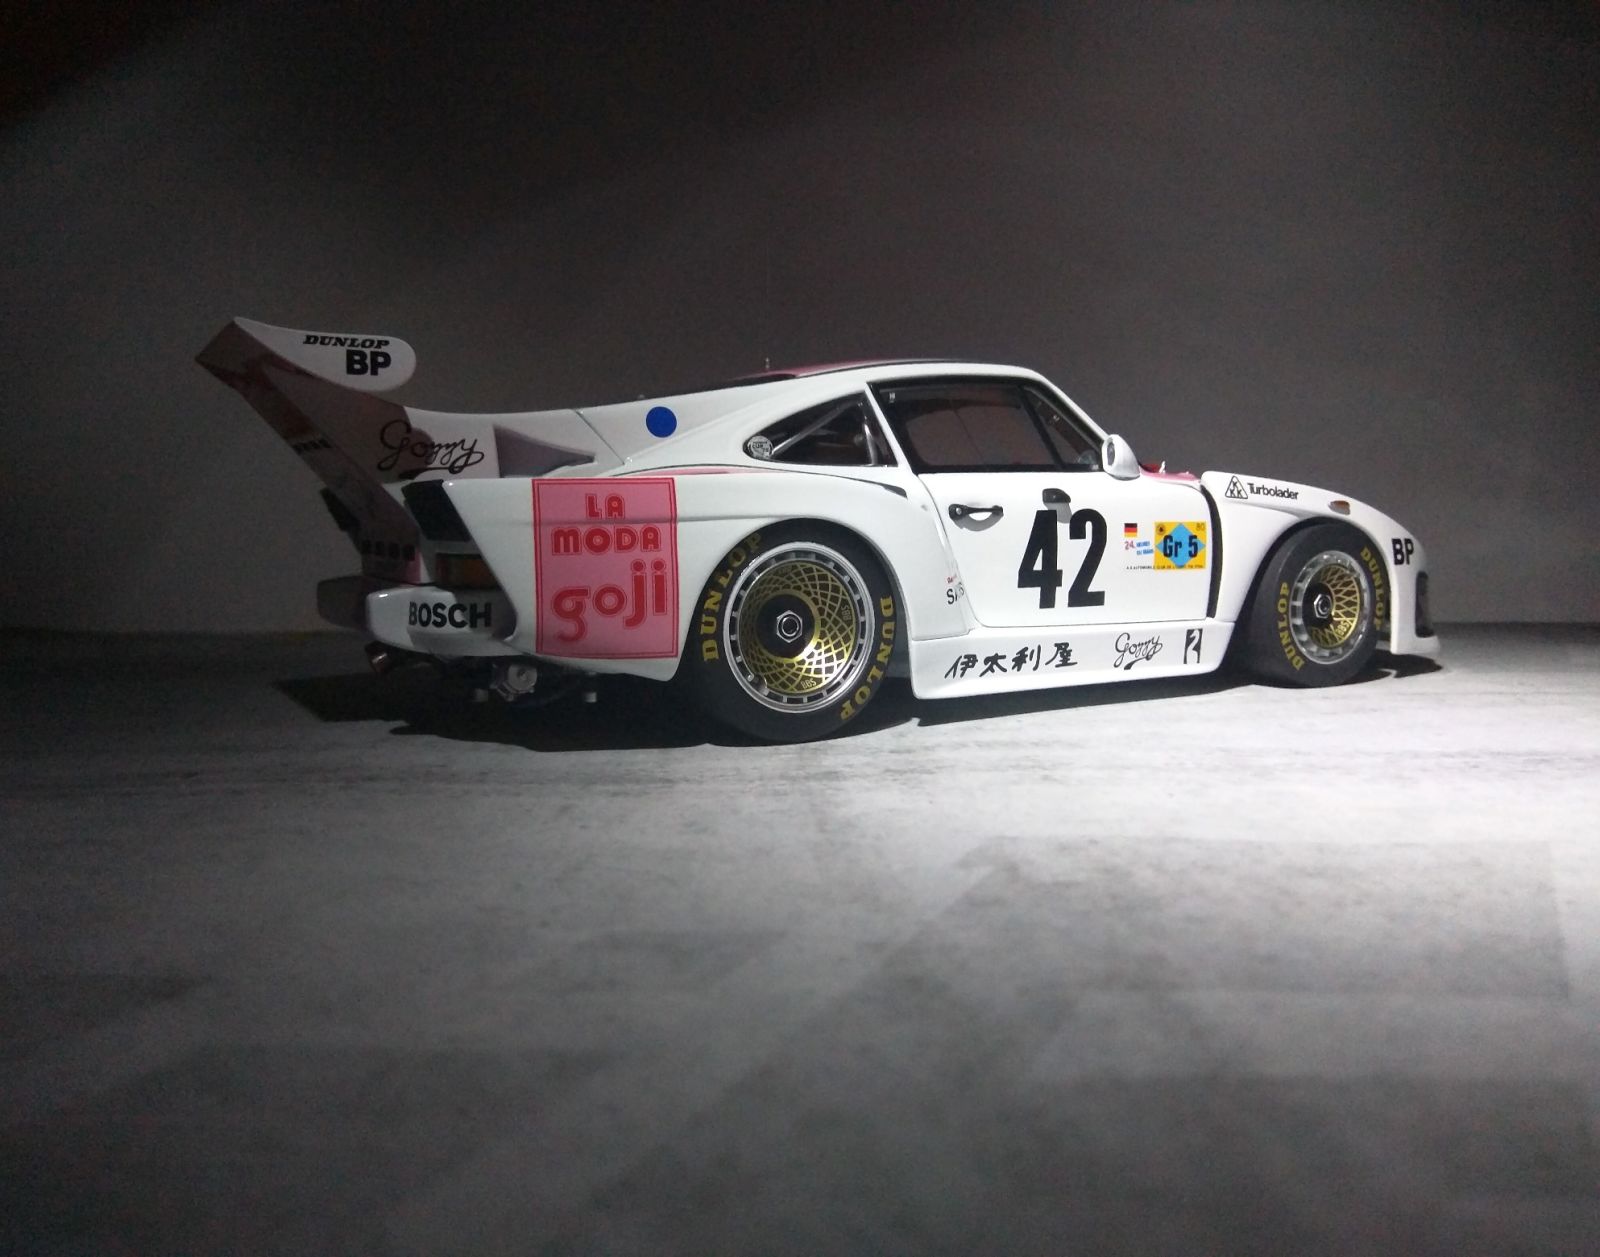 Illustration for article titled Happy Birthday To Me Hawl: Gozzy Kremer Racing Porsche 935 K3/80